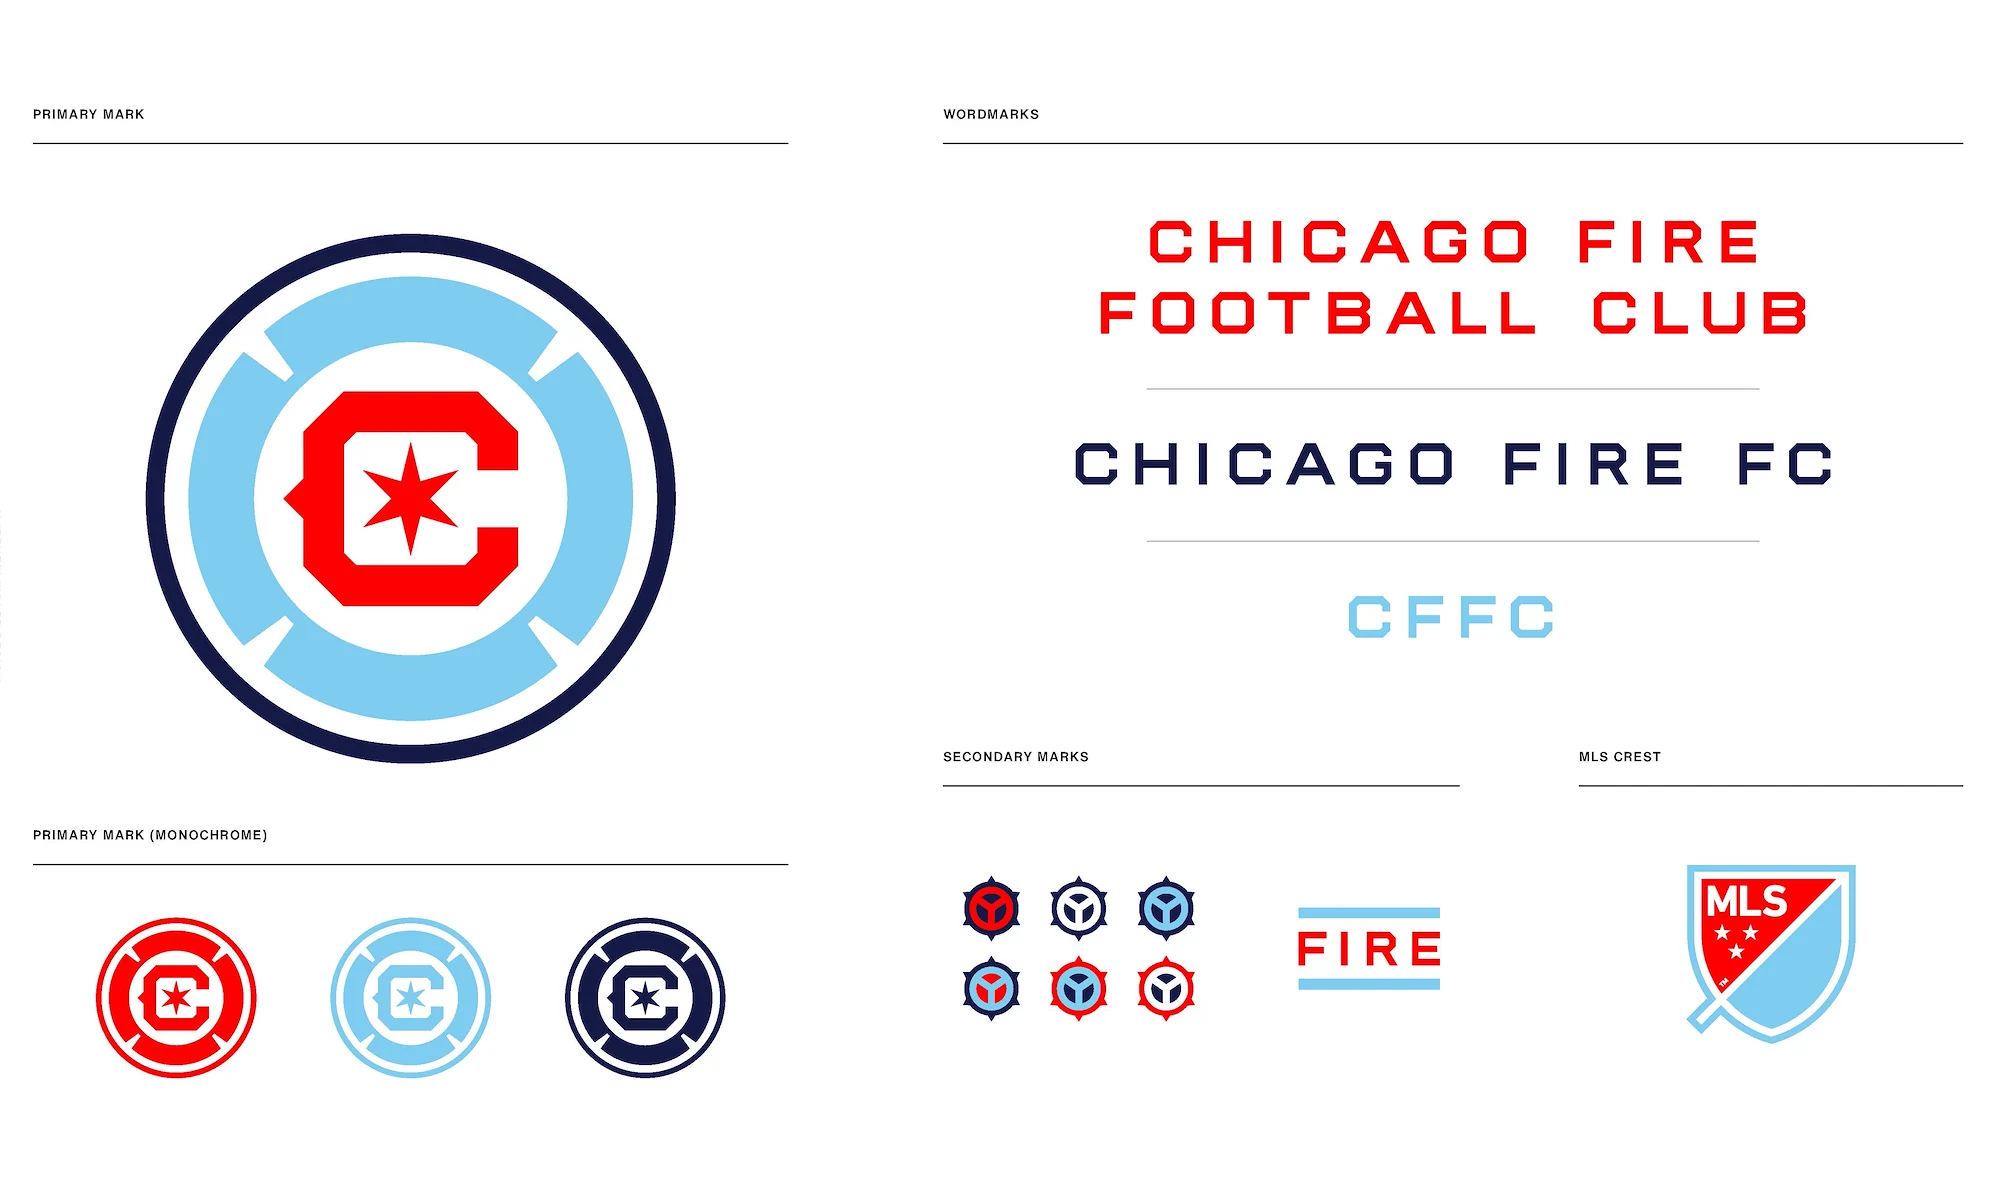 Chicago Fire FC – primary mark, Quelle: MLS